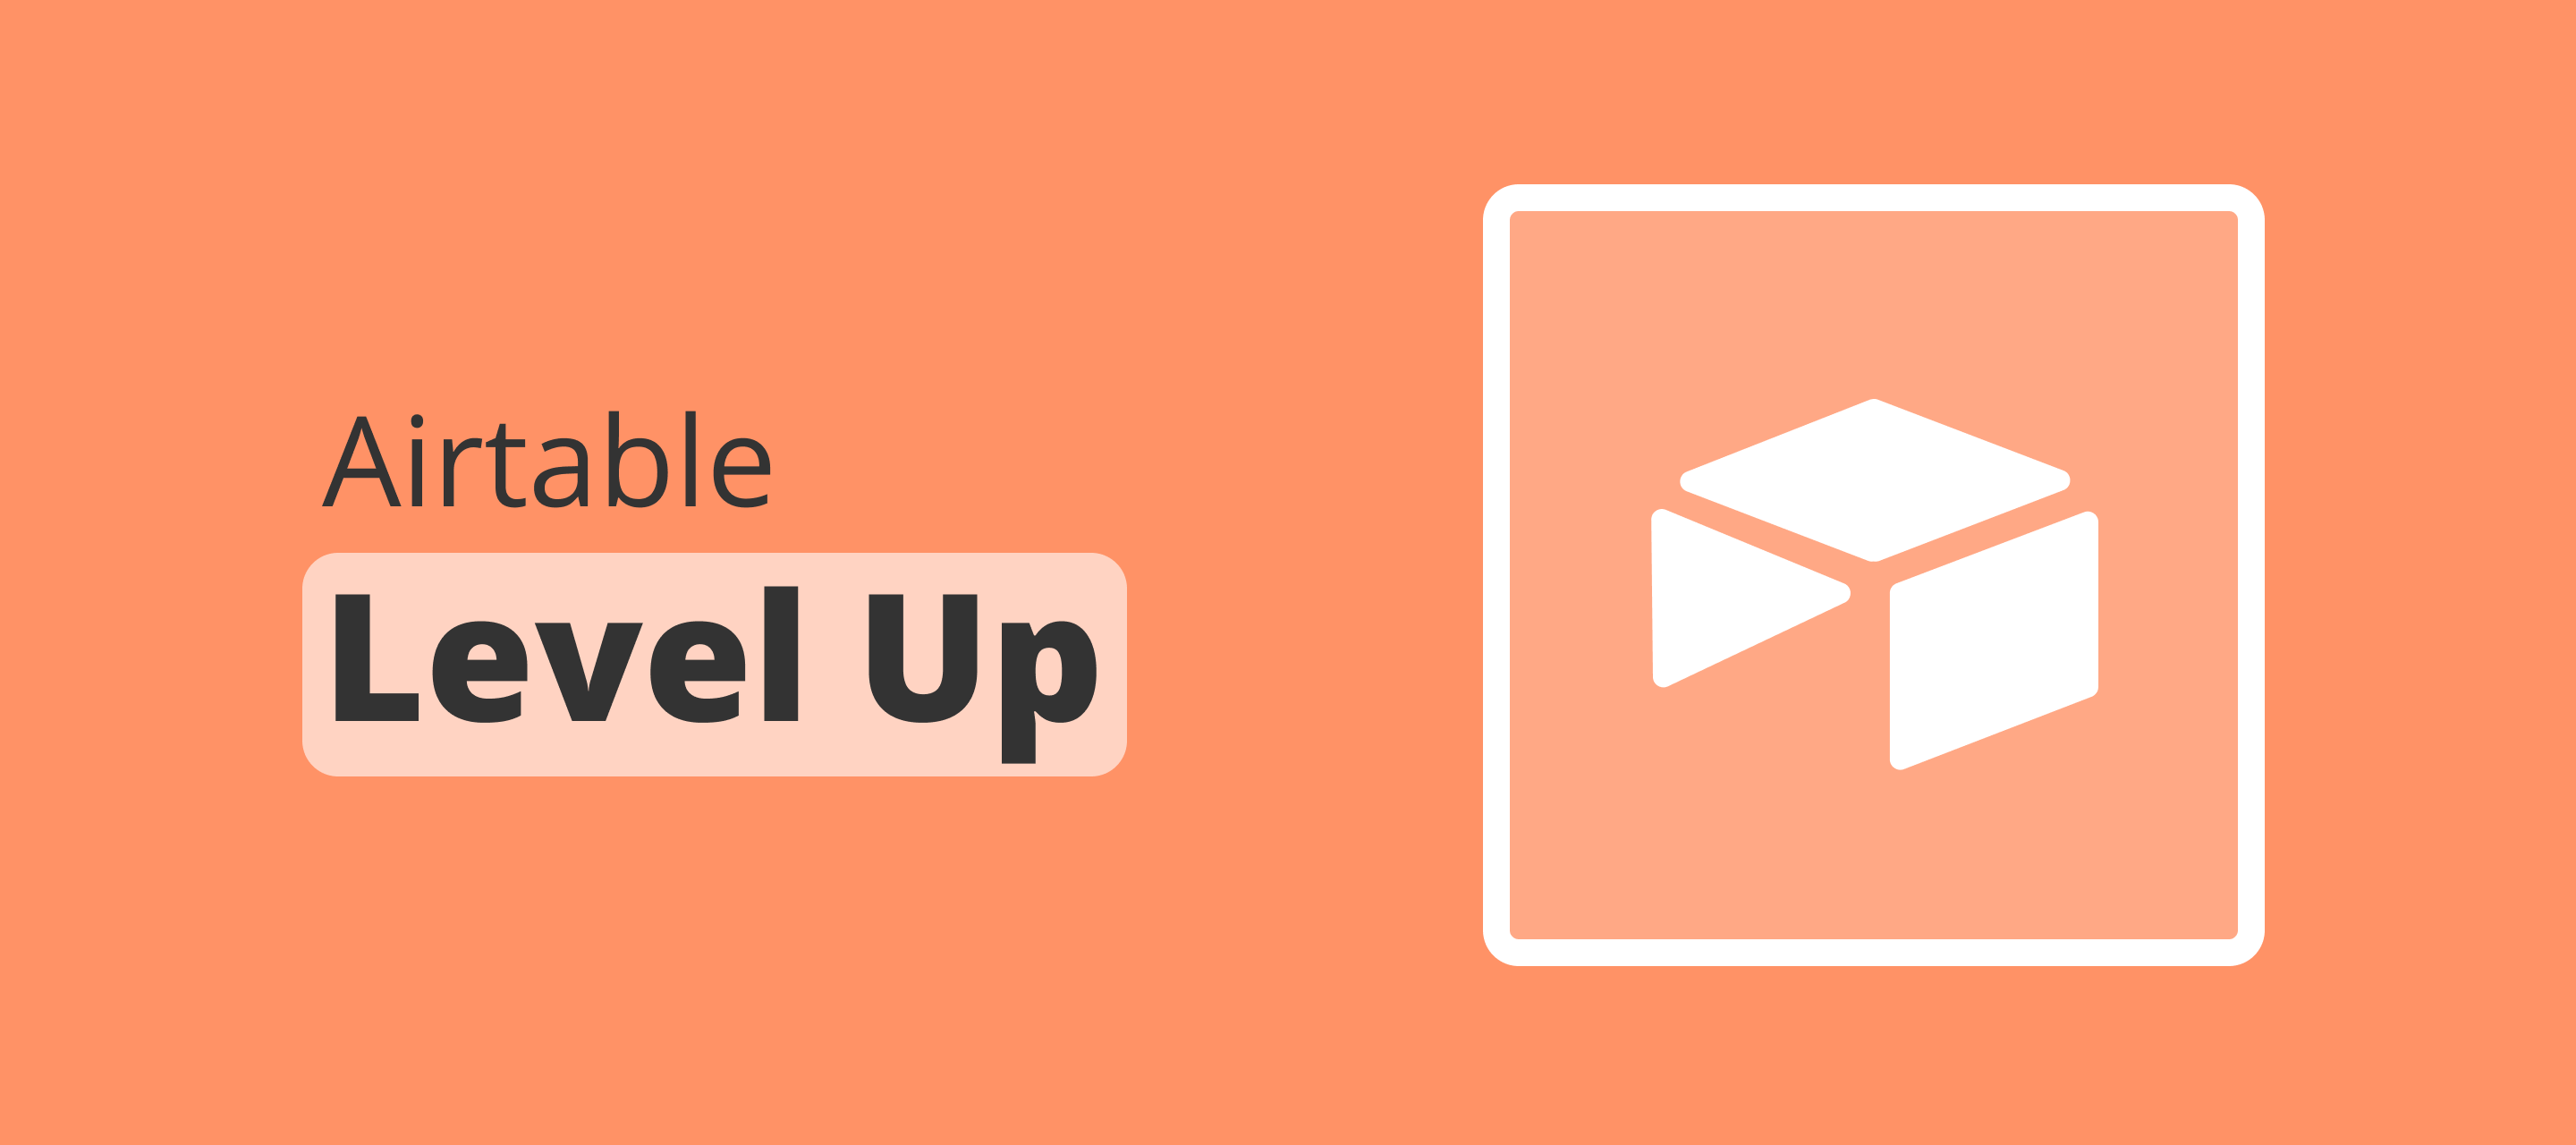 5 tips to level up your Airtable experience with Zapier